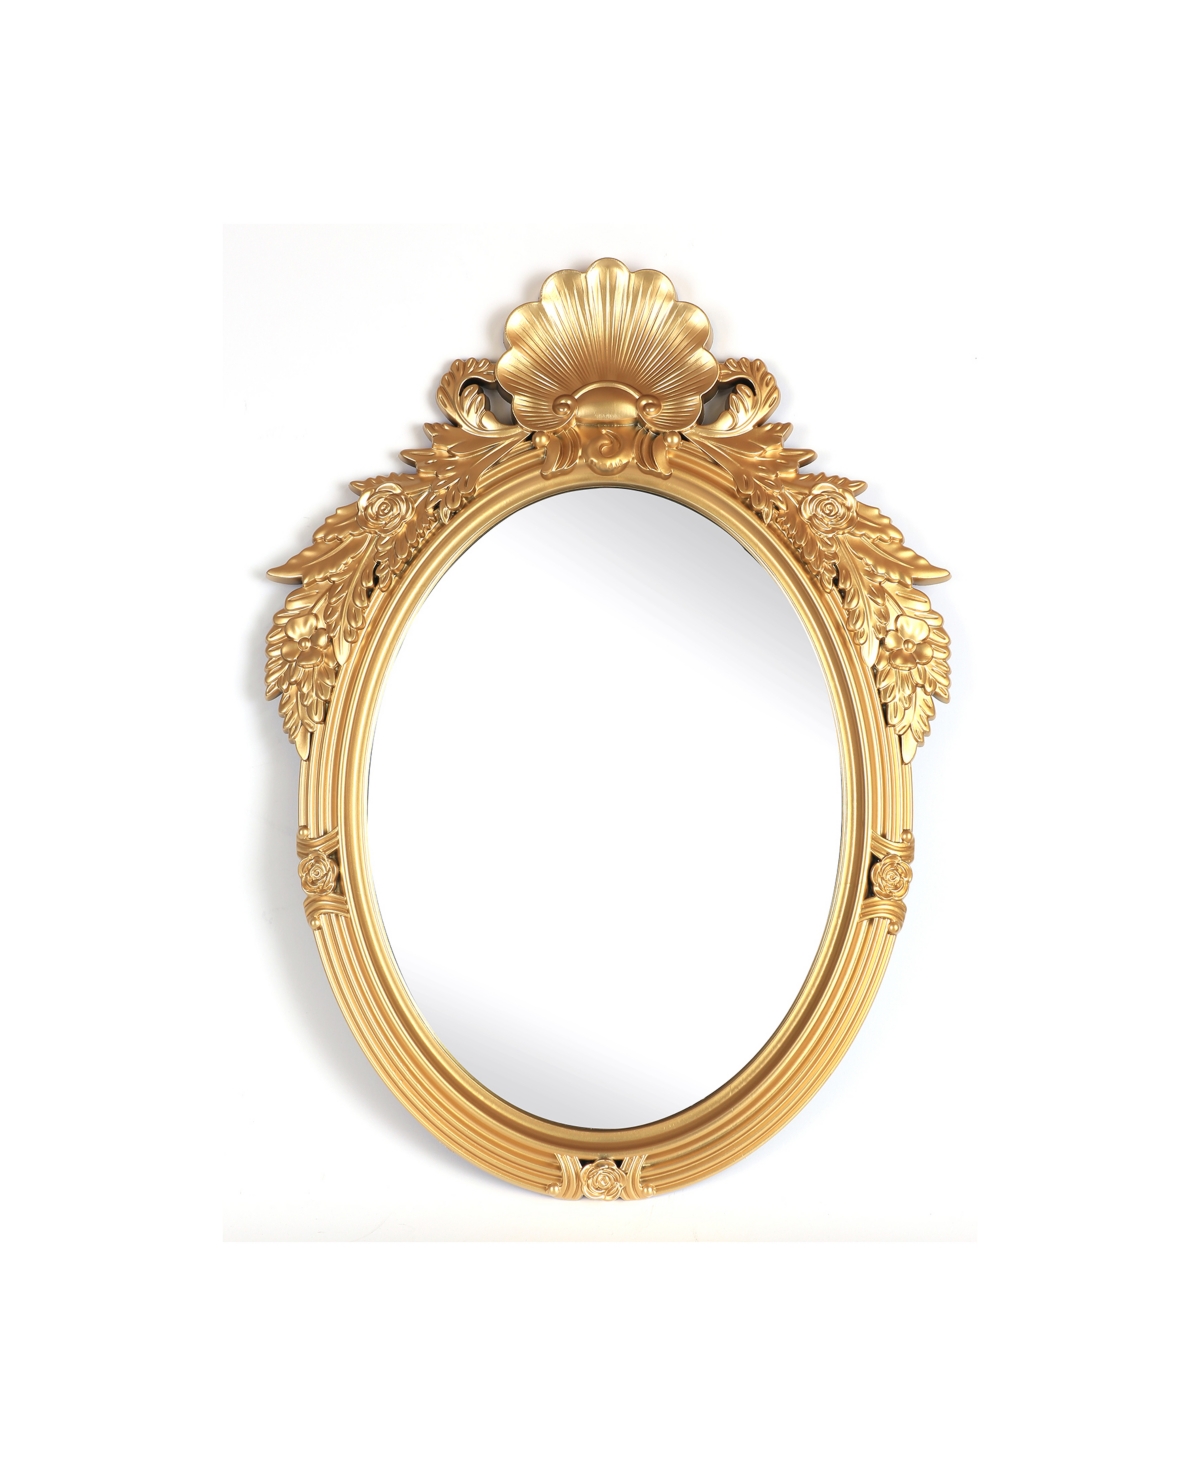 Oval Antique-Like Metal Framed Wall Mirror, 35" x 26" - Gold